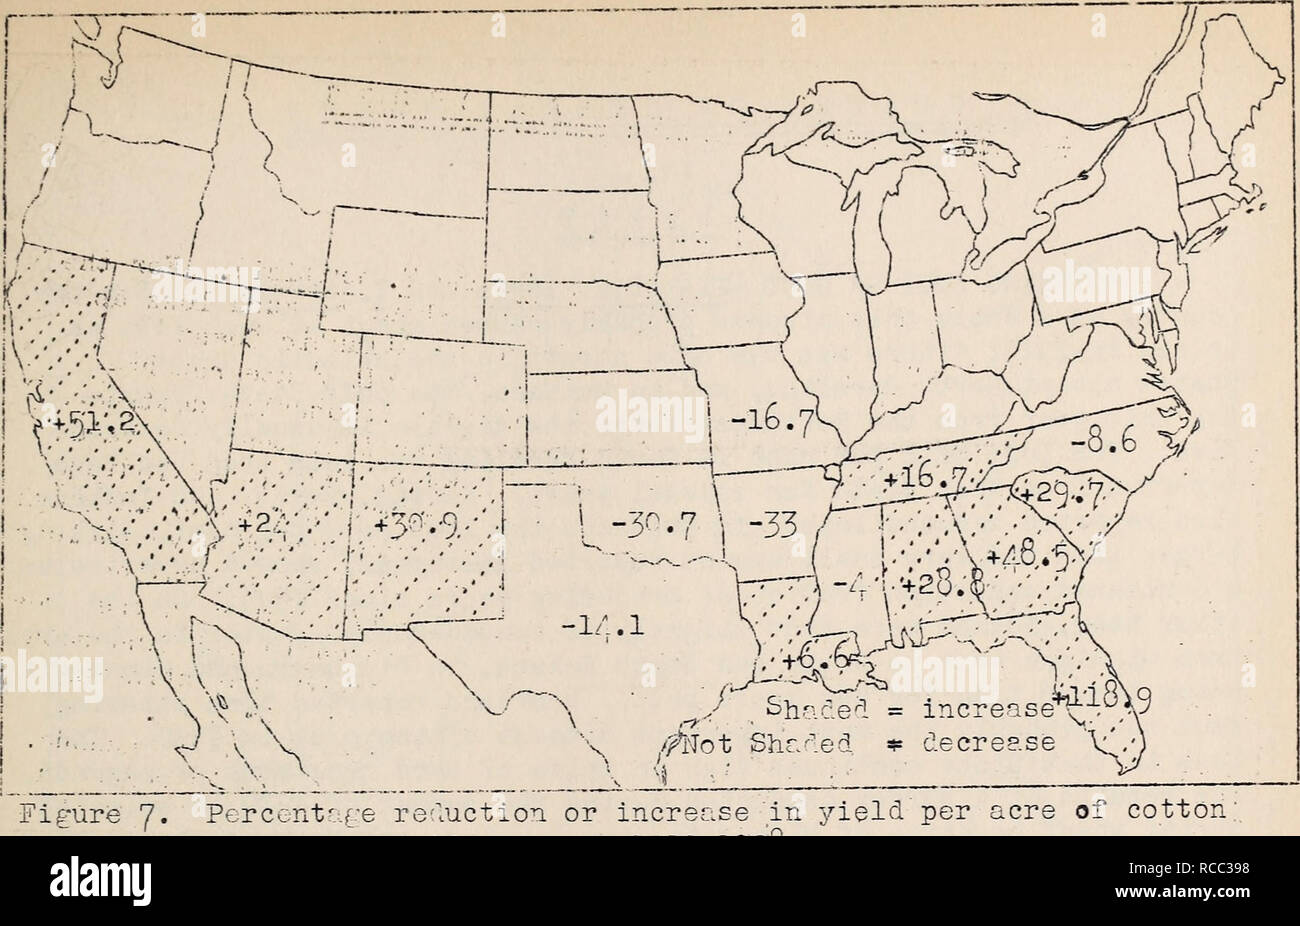 . Diseases of plants in the United States in 1930. Plant diseases United States. A2. in l^g'O from average yield per cere I515-I520. Losses from disease were generally mucji less than norm? 1 in 193r'» Outstanding examples are stem rust, leaf rust, and scab of smell grr.ins, potato late blight except in Florida, Septoria blight of tomatoes, apple sceb in the drought area, and peach brown rot. others Trill be noted in the summary. Certain diseases, however, showed increased destructiveness. These include, naturally, pot-to tipburn rnd blossom-end rot of tomato, and also potato scrb, non-parasit Stock Photo